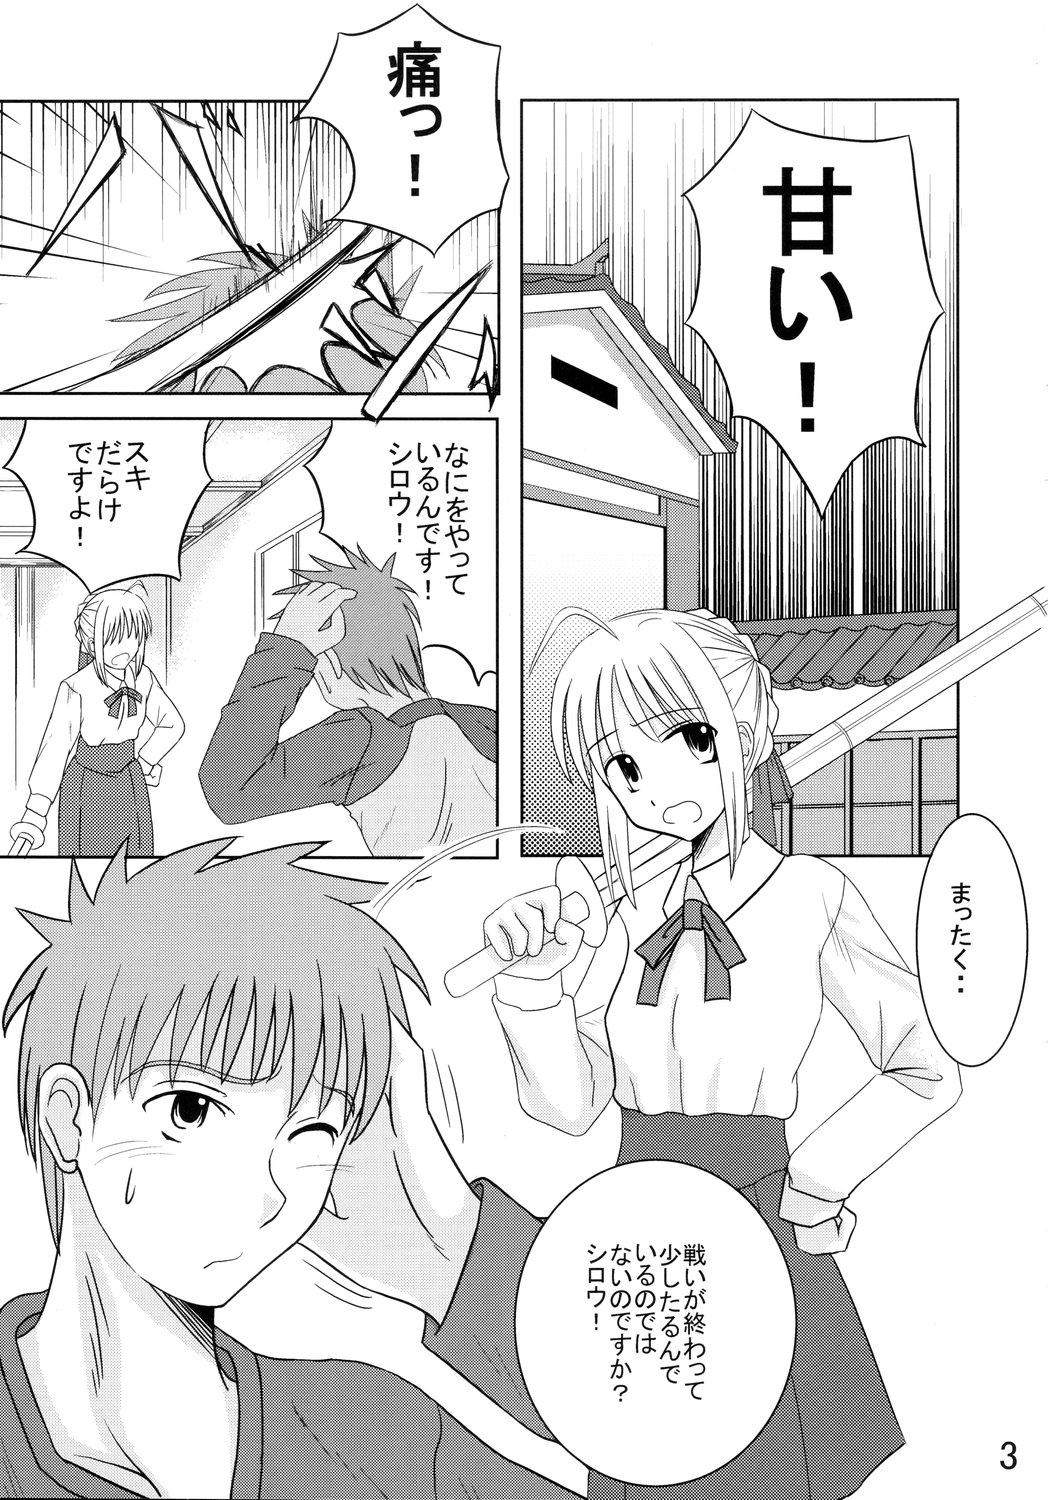 Uncensored Saber Of Sanity - Fate stay night Furry - Page 2